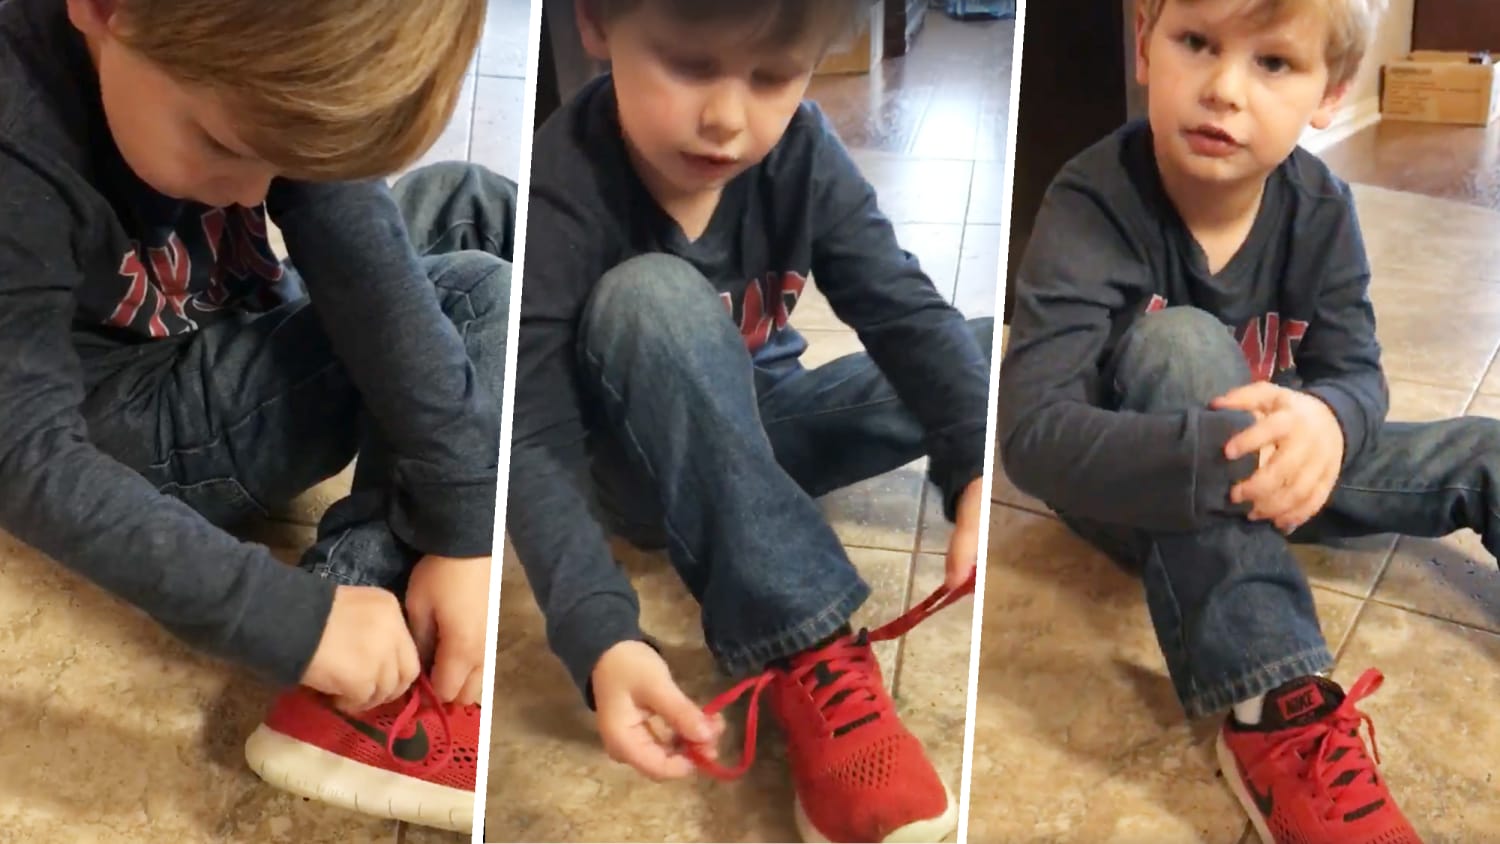 5-year-old boy shows shoe-tying hack in 